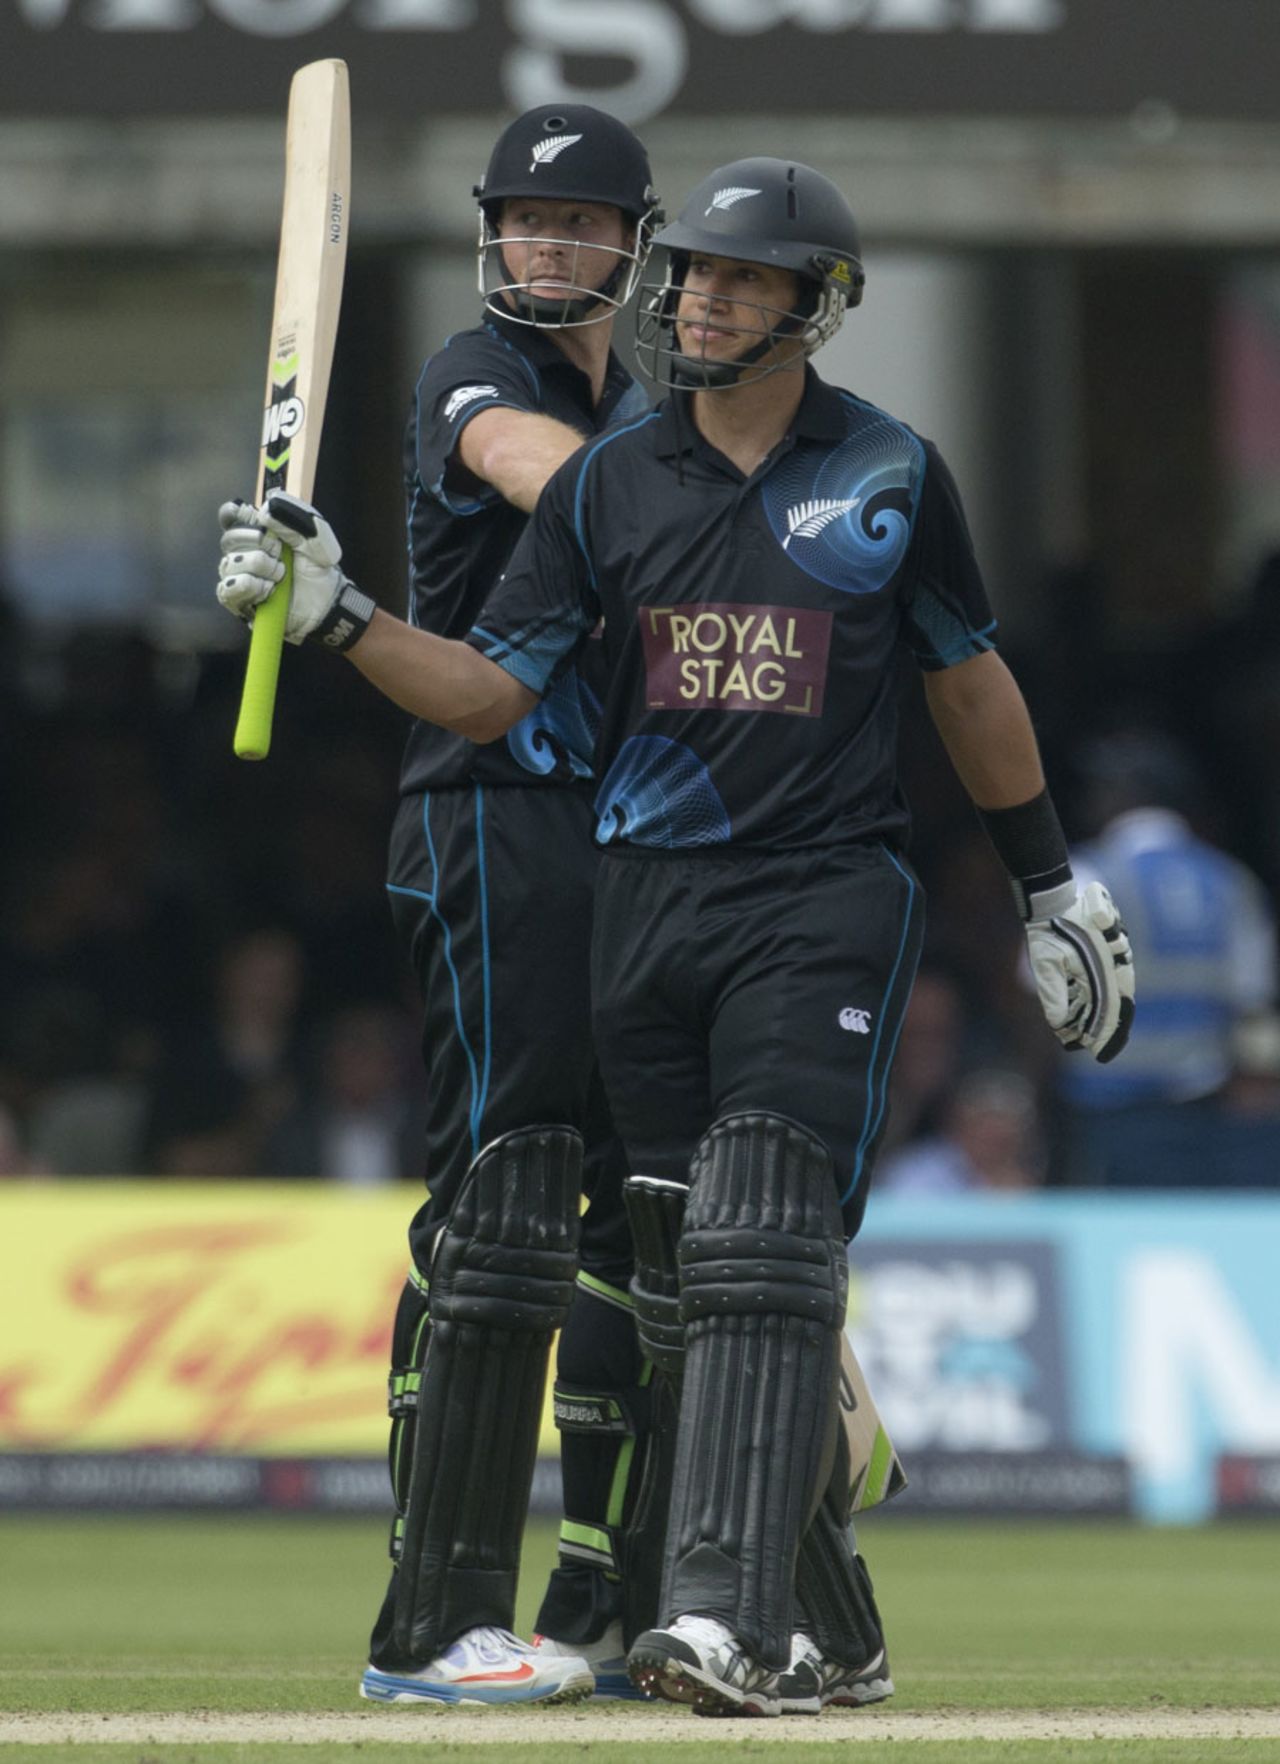 Ross Taylor gets a pat from Martin Guptill after reaching fifty, England v New Zealand, 1st ODI, Lord's, May 31, 2013